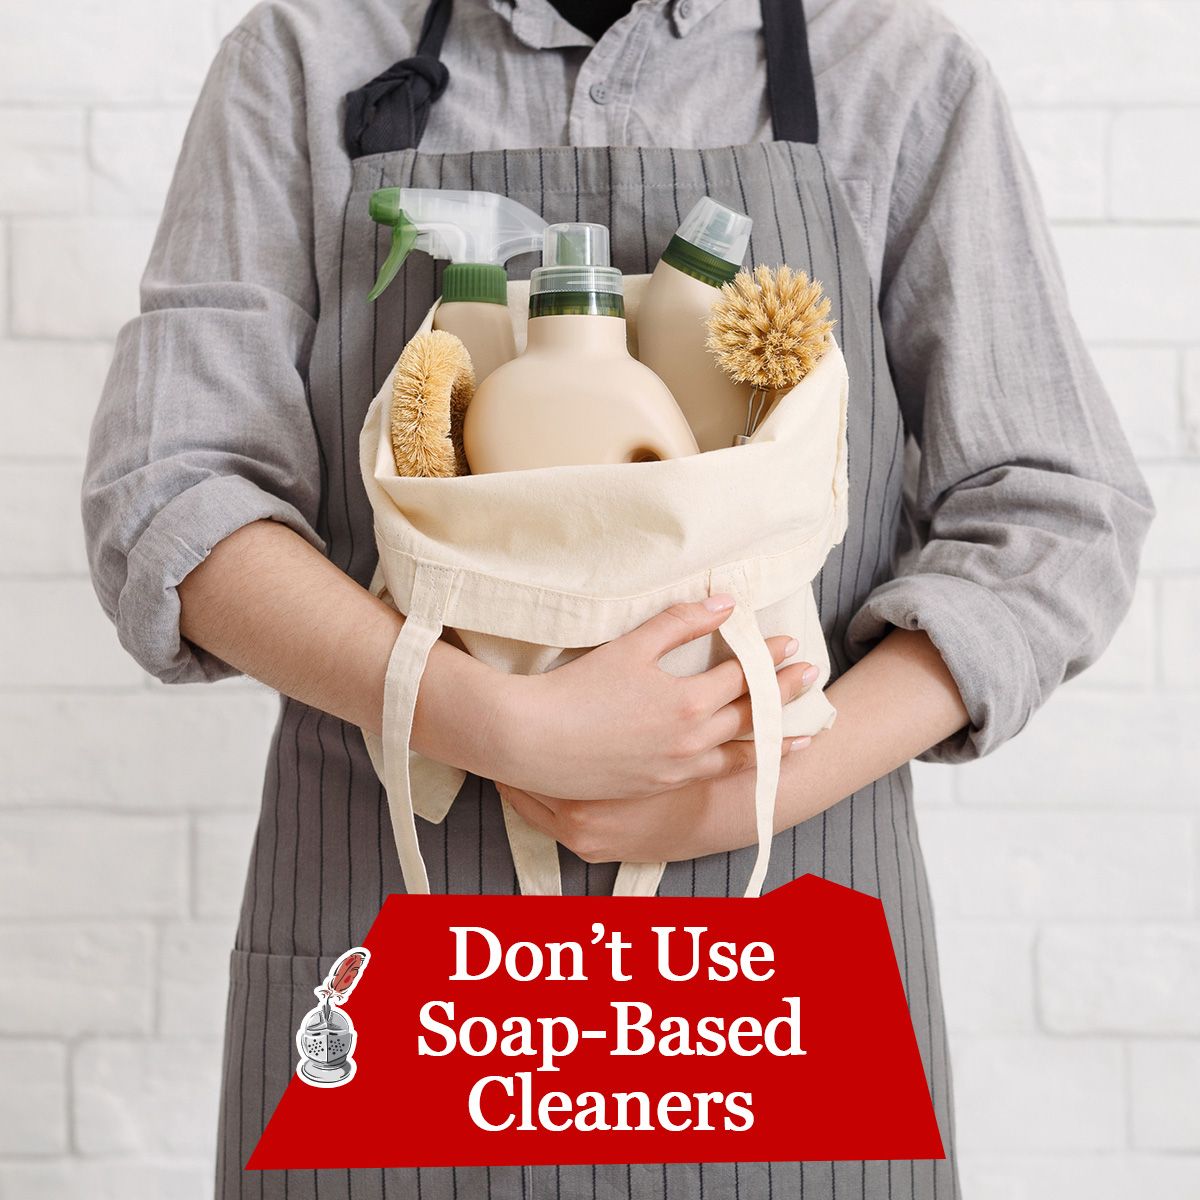 Don't Use Soap-Based Cleaners